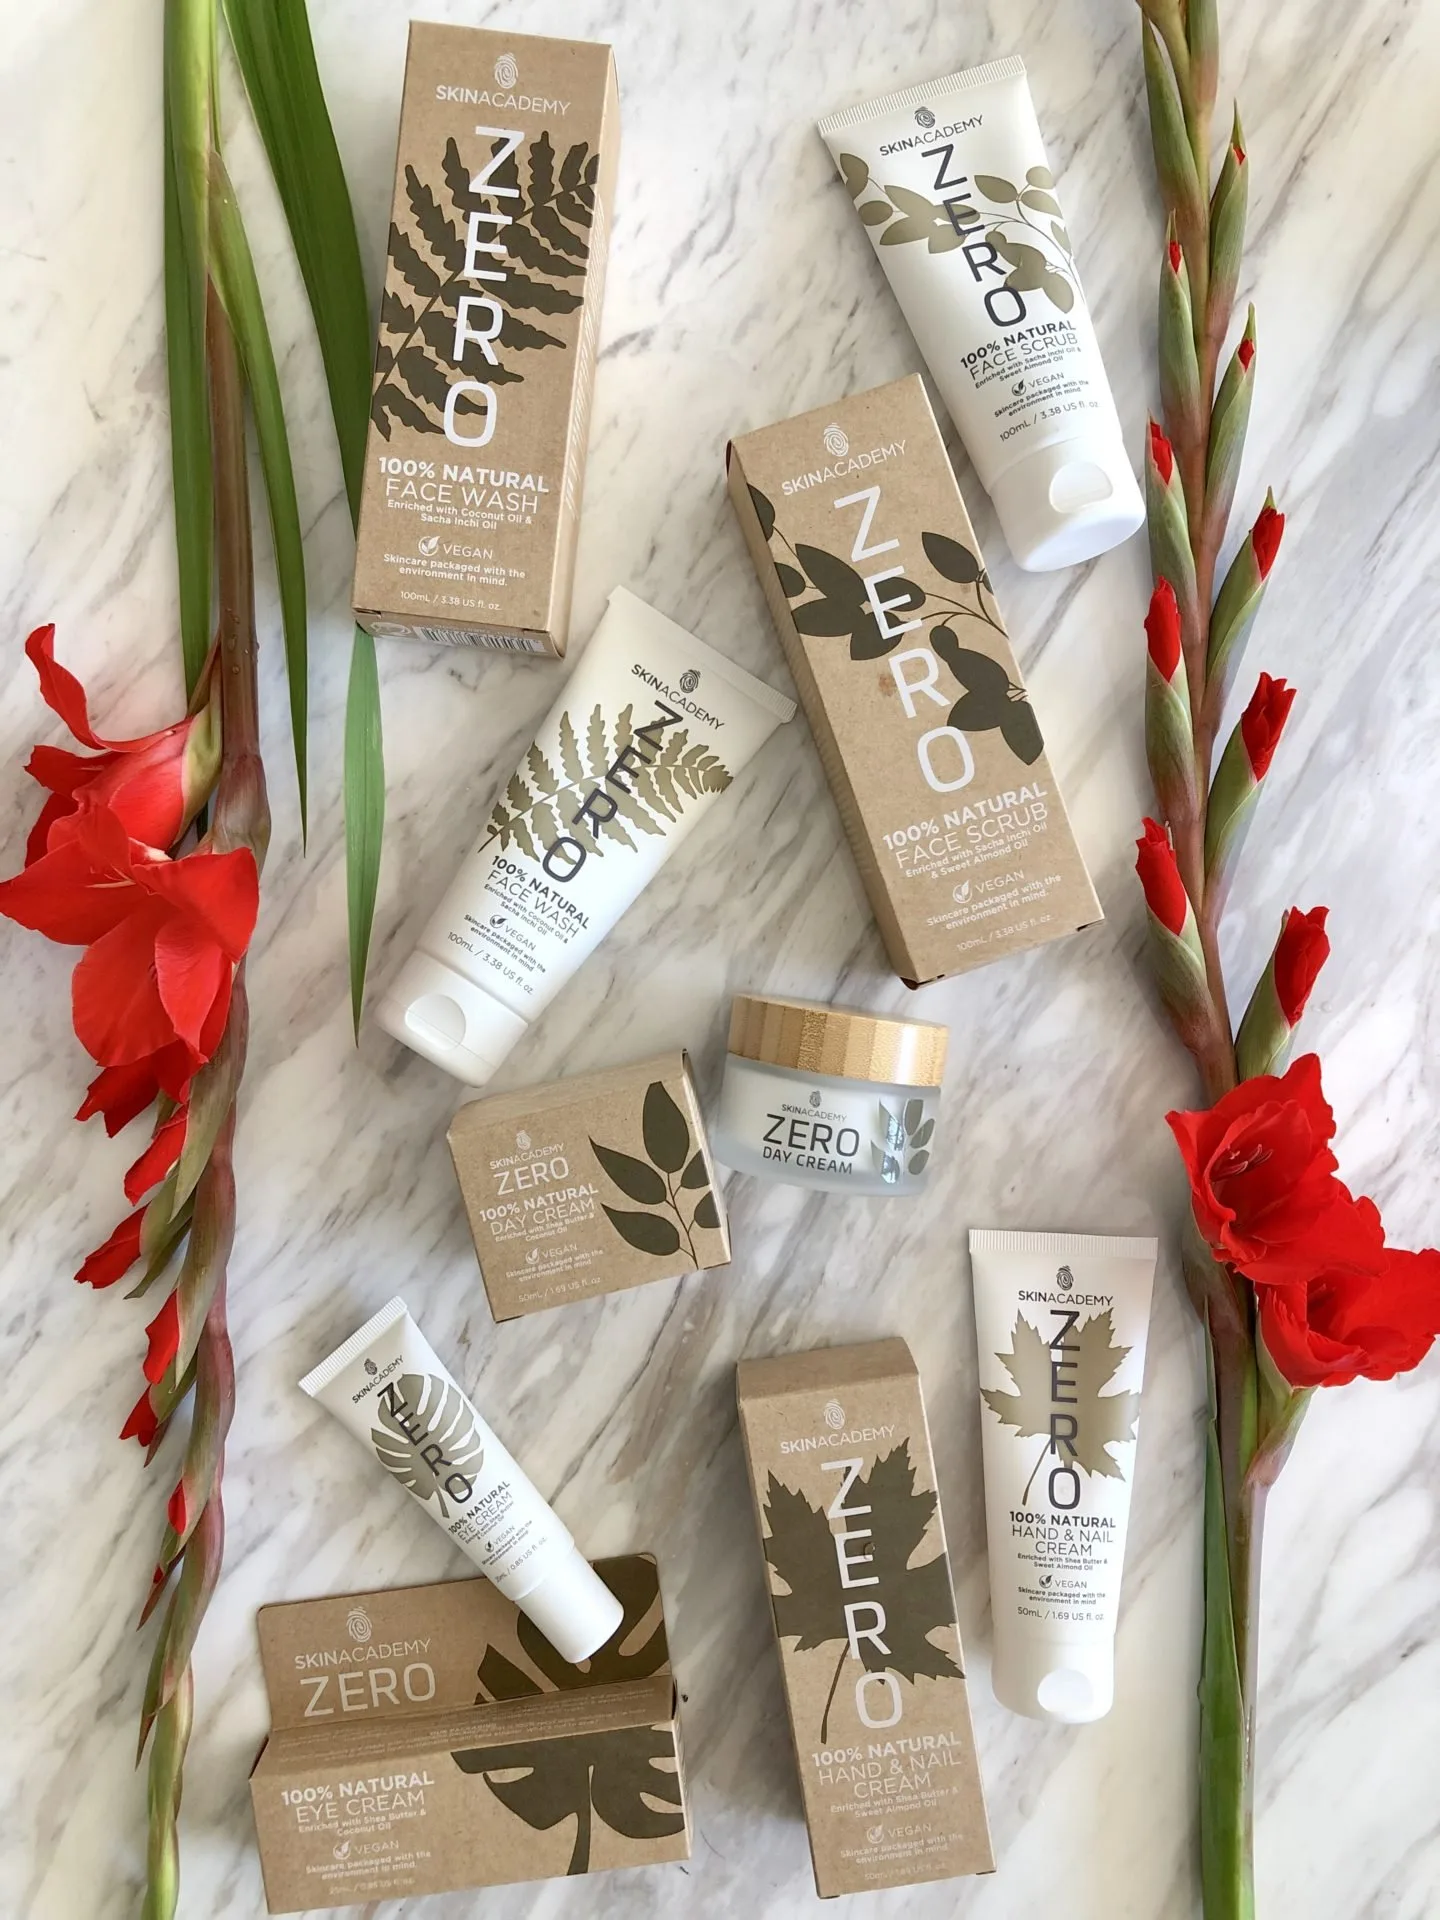 Skin Academy Zero skin care is  high quality, 100% natural face and body care which has environmentally friendly packaging and is also vegan! Skin Academy Zero skin care is a range of products such a face wash and day cream which are ultra hydrating as well as nourishing.